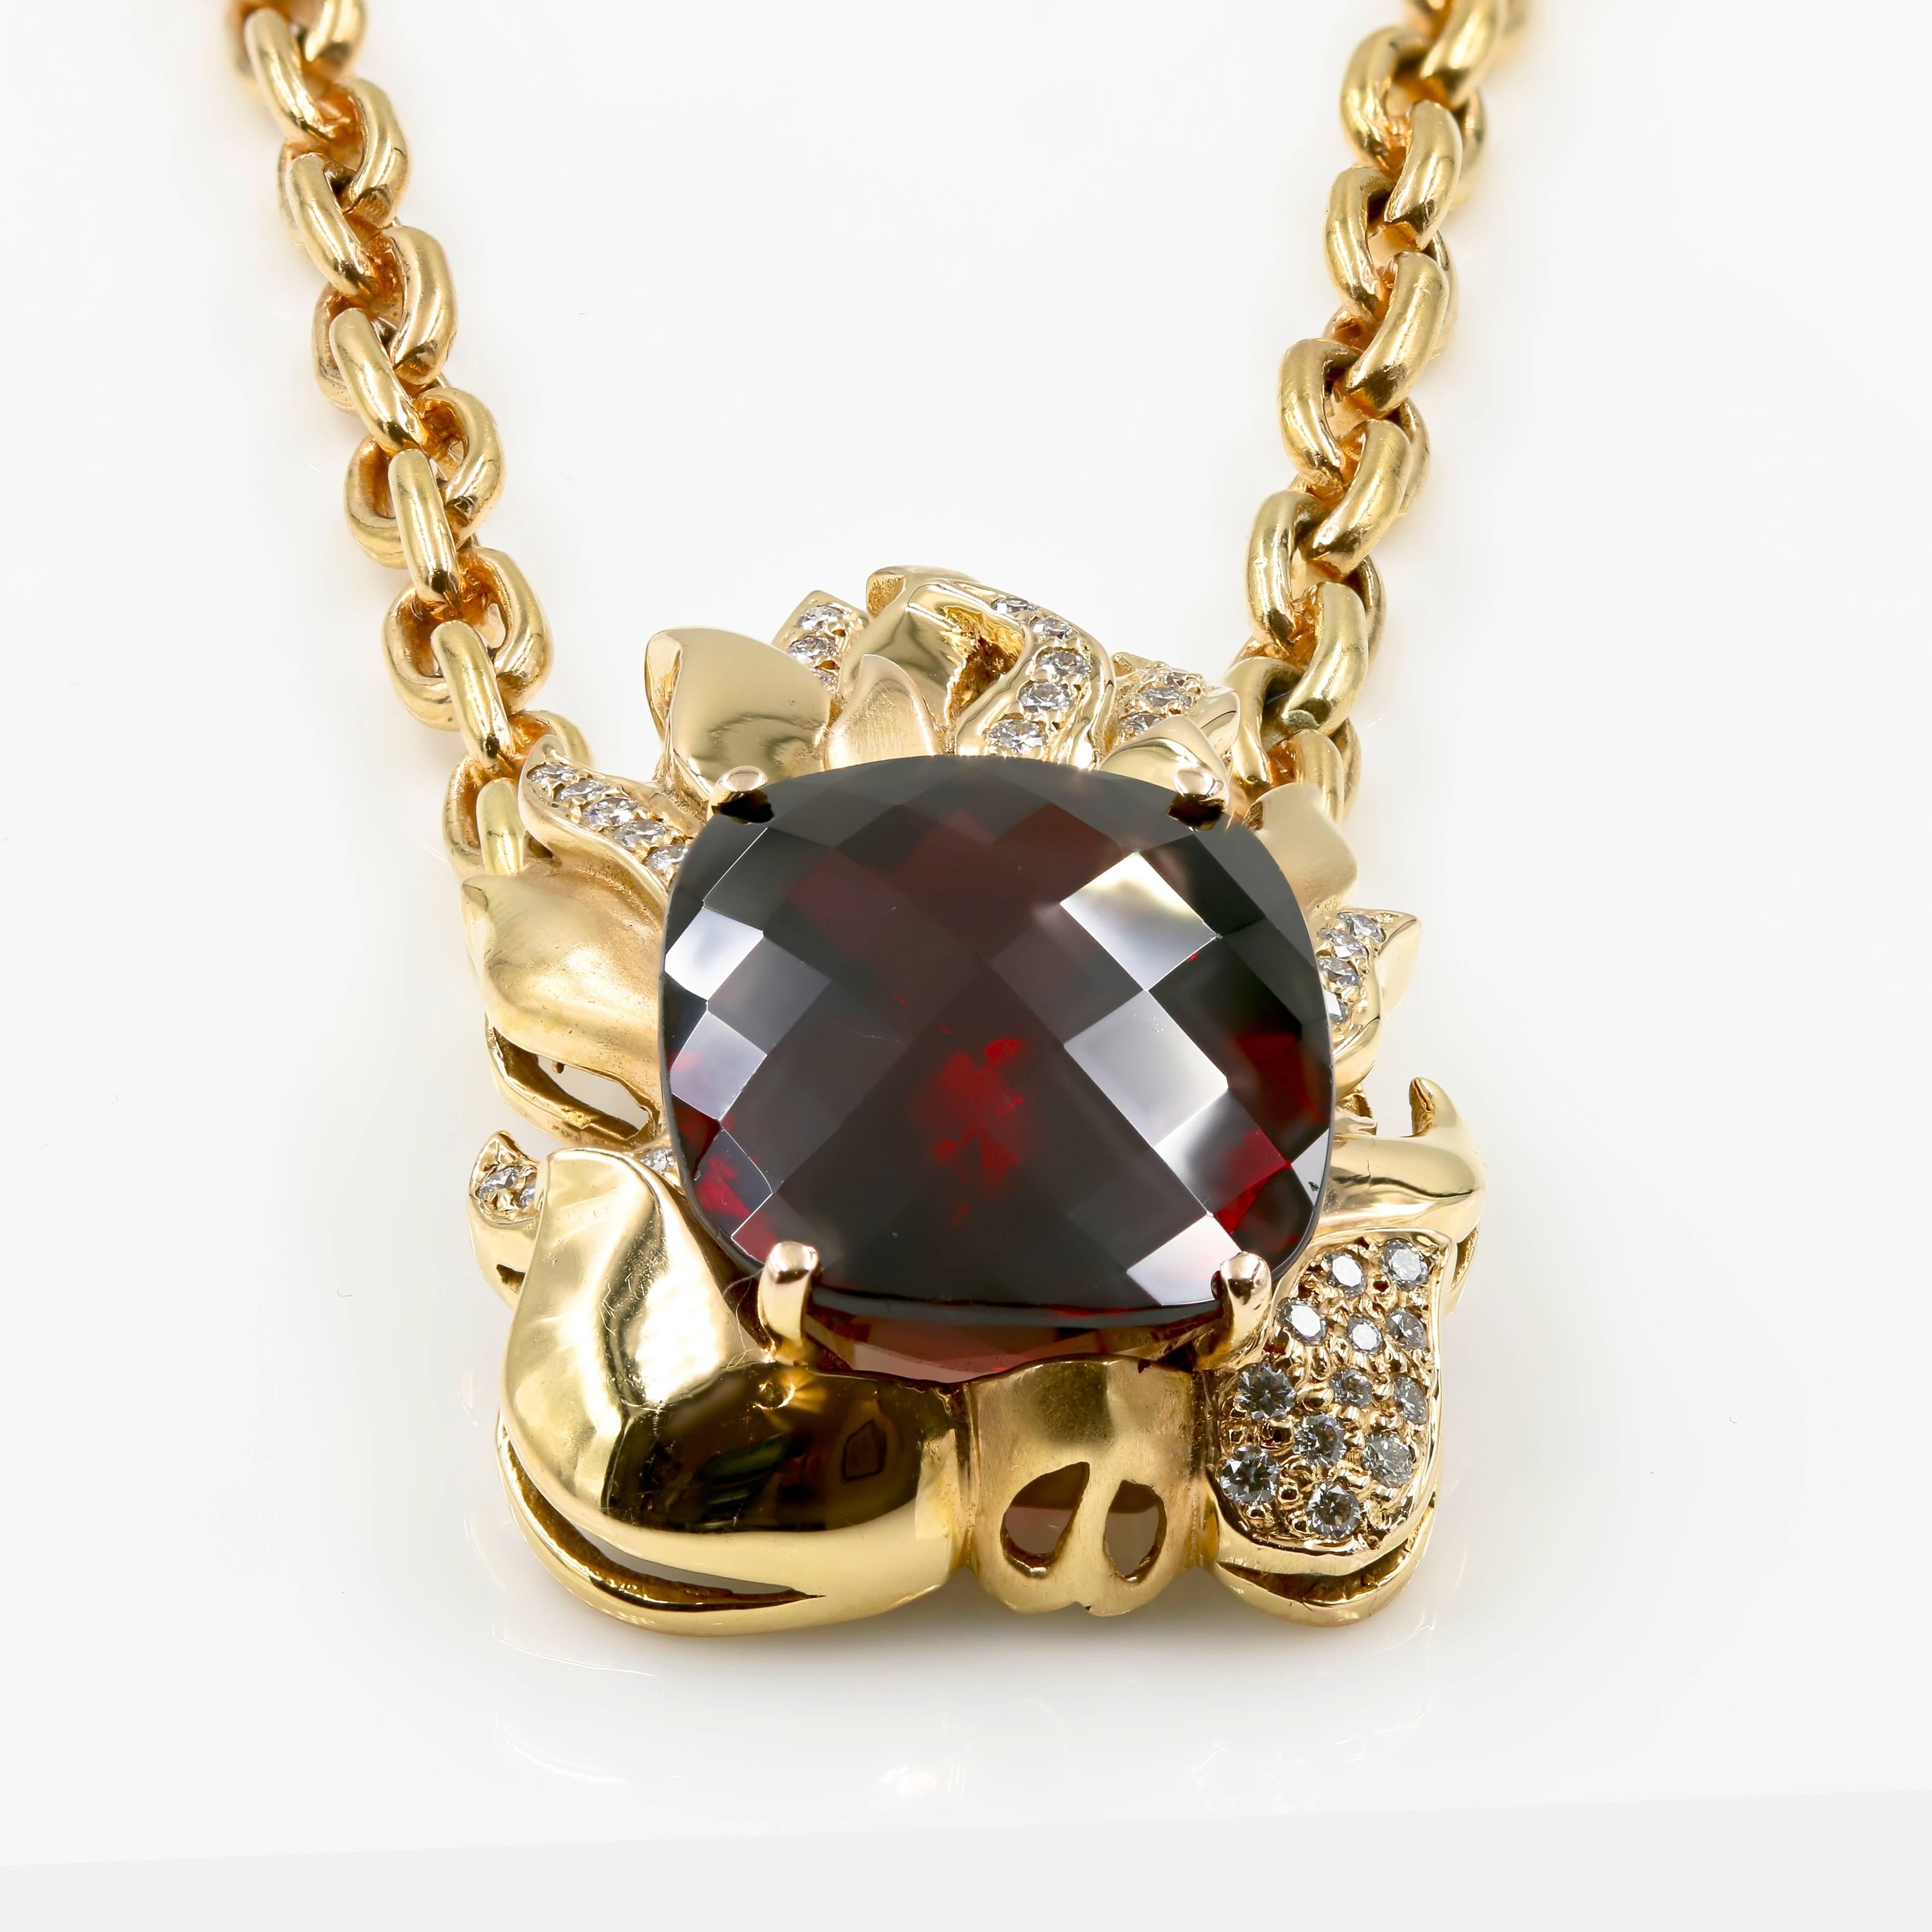 Contemporary Extraordinary 21.39 Carat Natural Rhodolite and Diamond Necklace For Sale